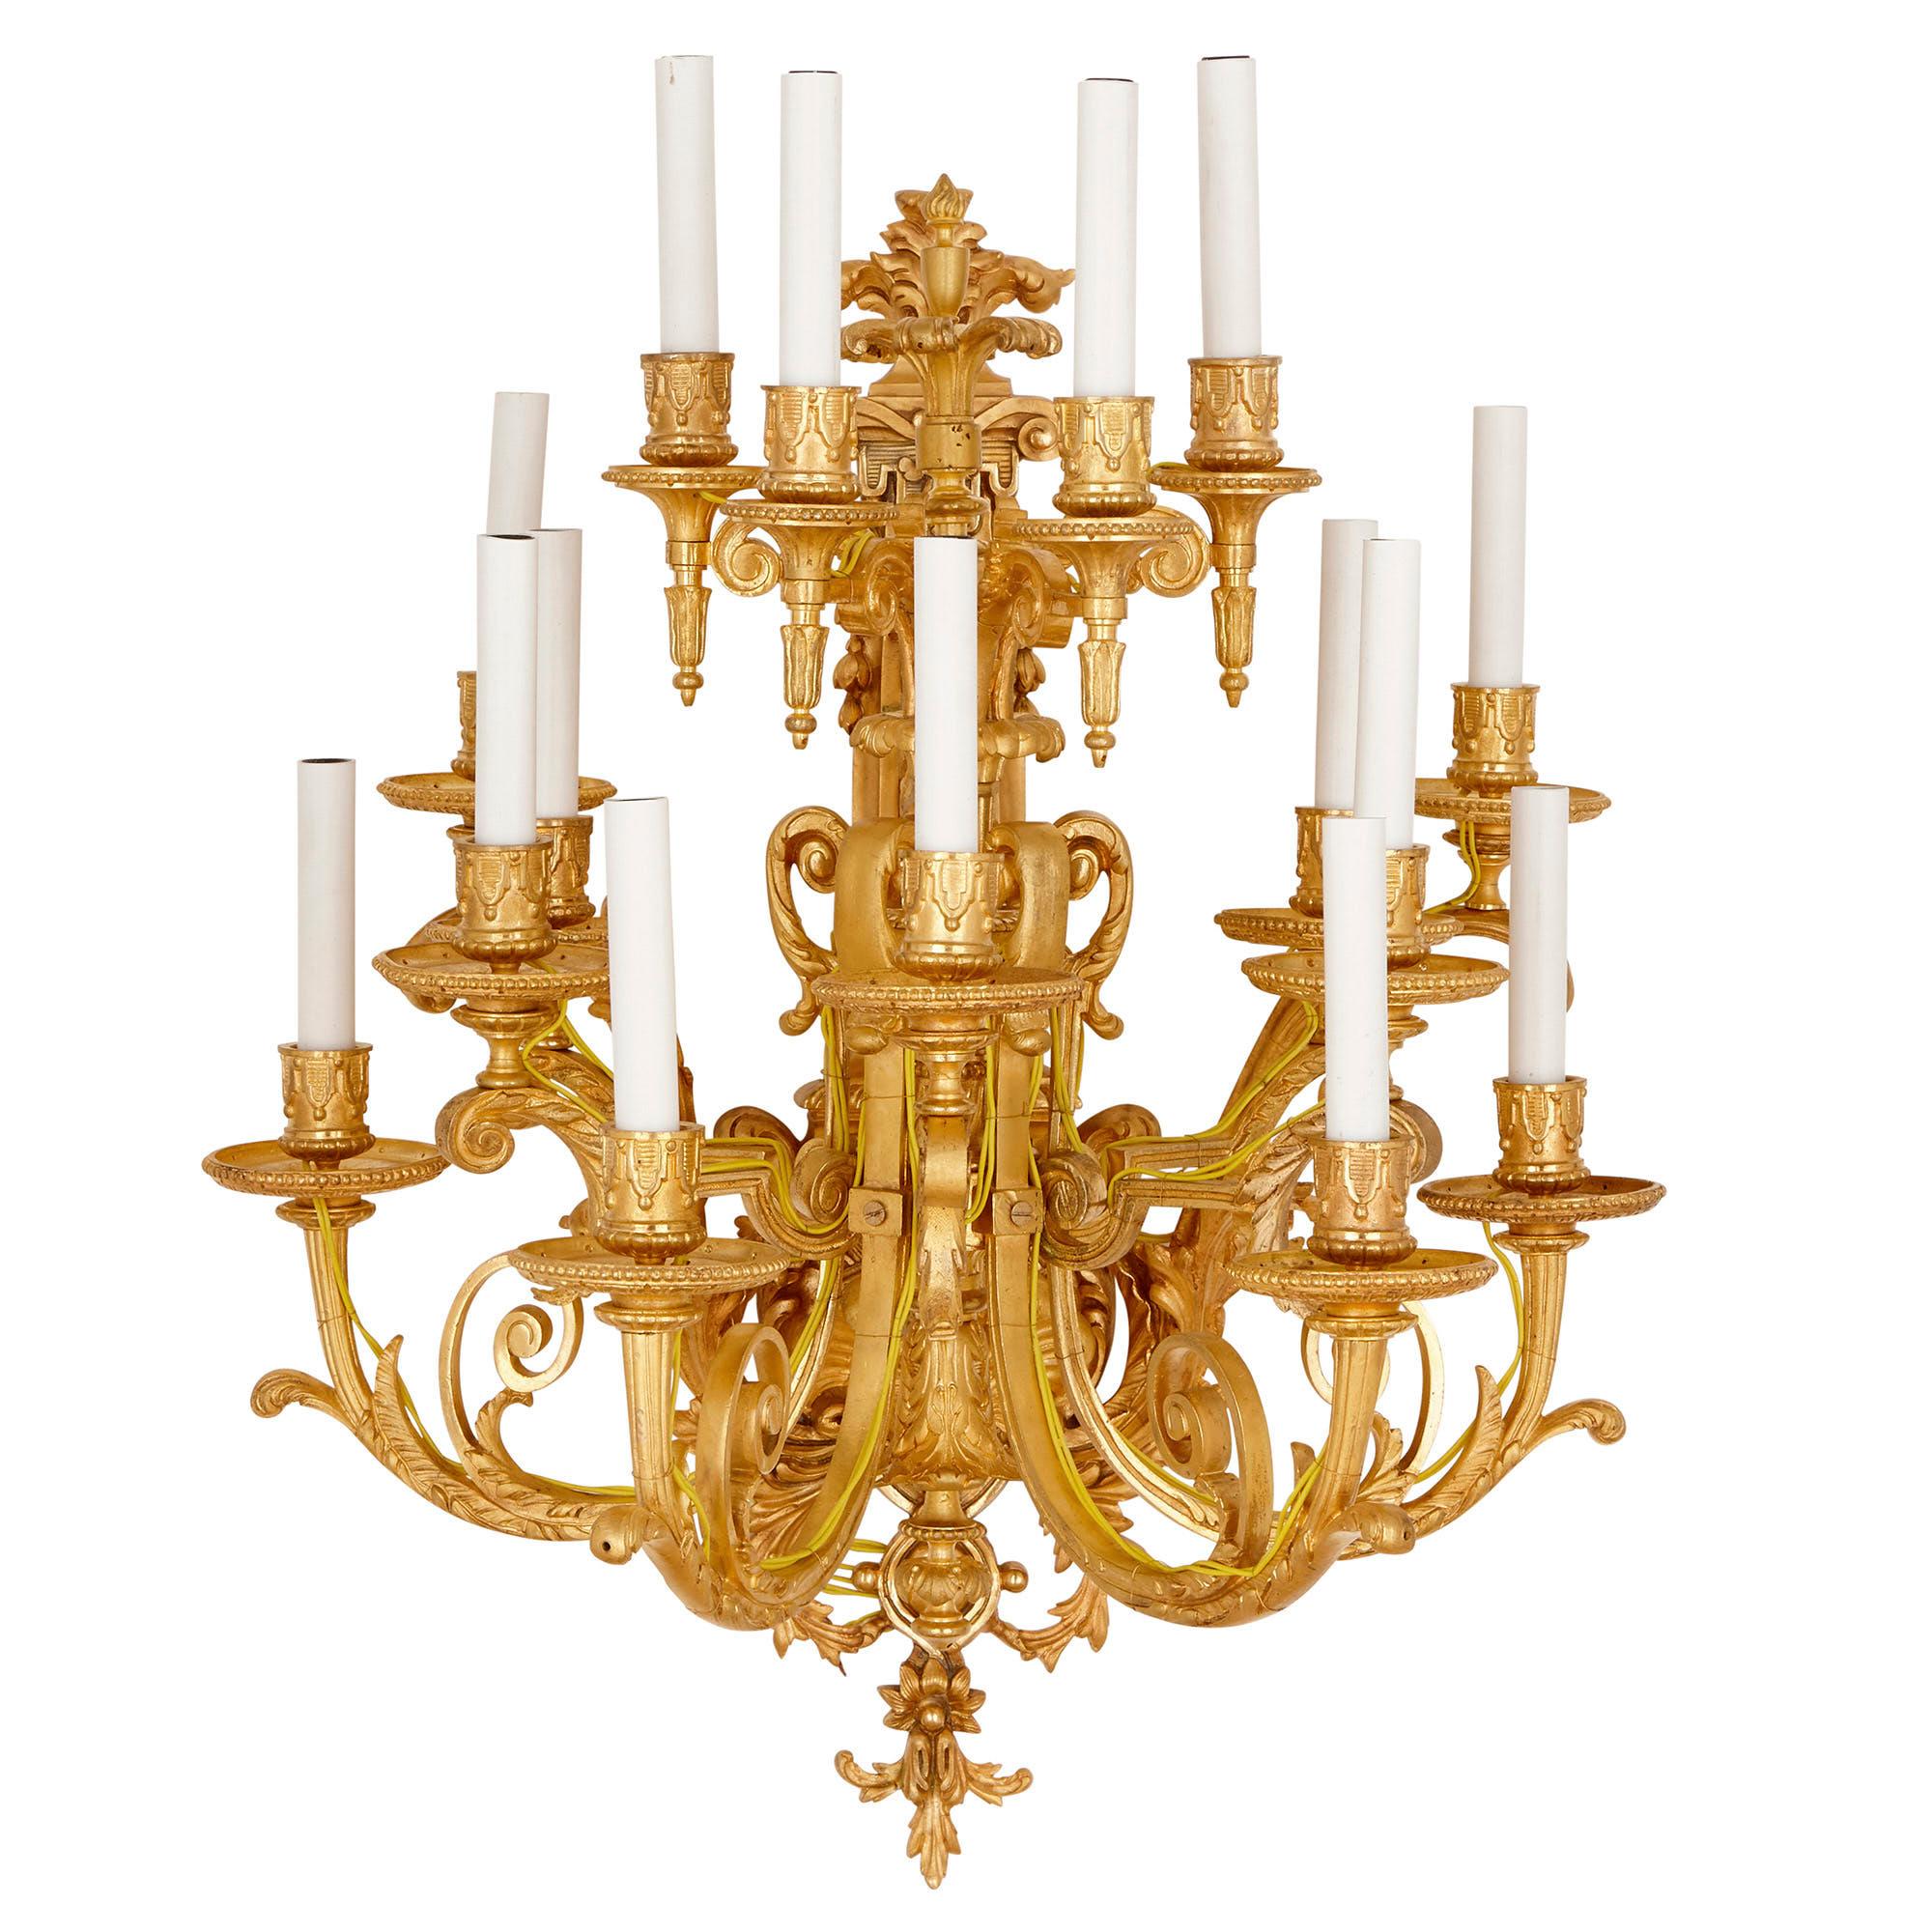 These gilt bronze (ormolu) wall sconces are magnificent pieces, each holding fifteen lights. The sconces will look beautiful either mounted onto the wall in a line, or paired and placed either side of a large mirror or doorway. 

The lights